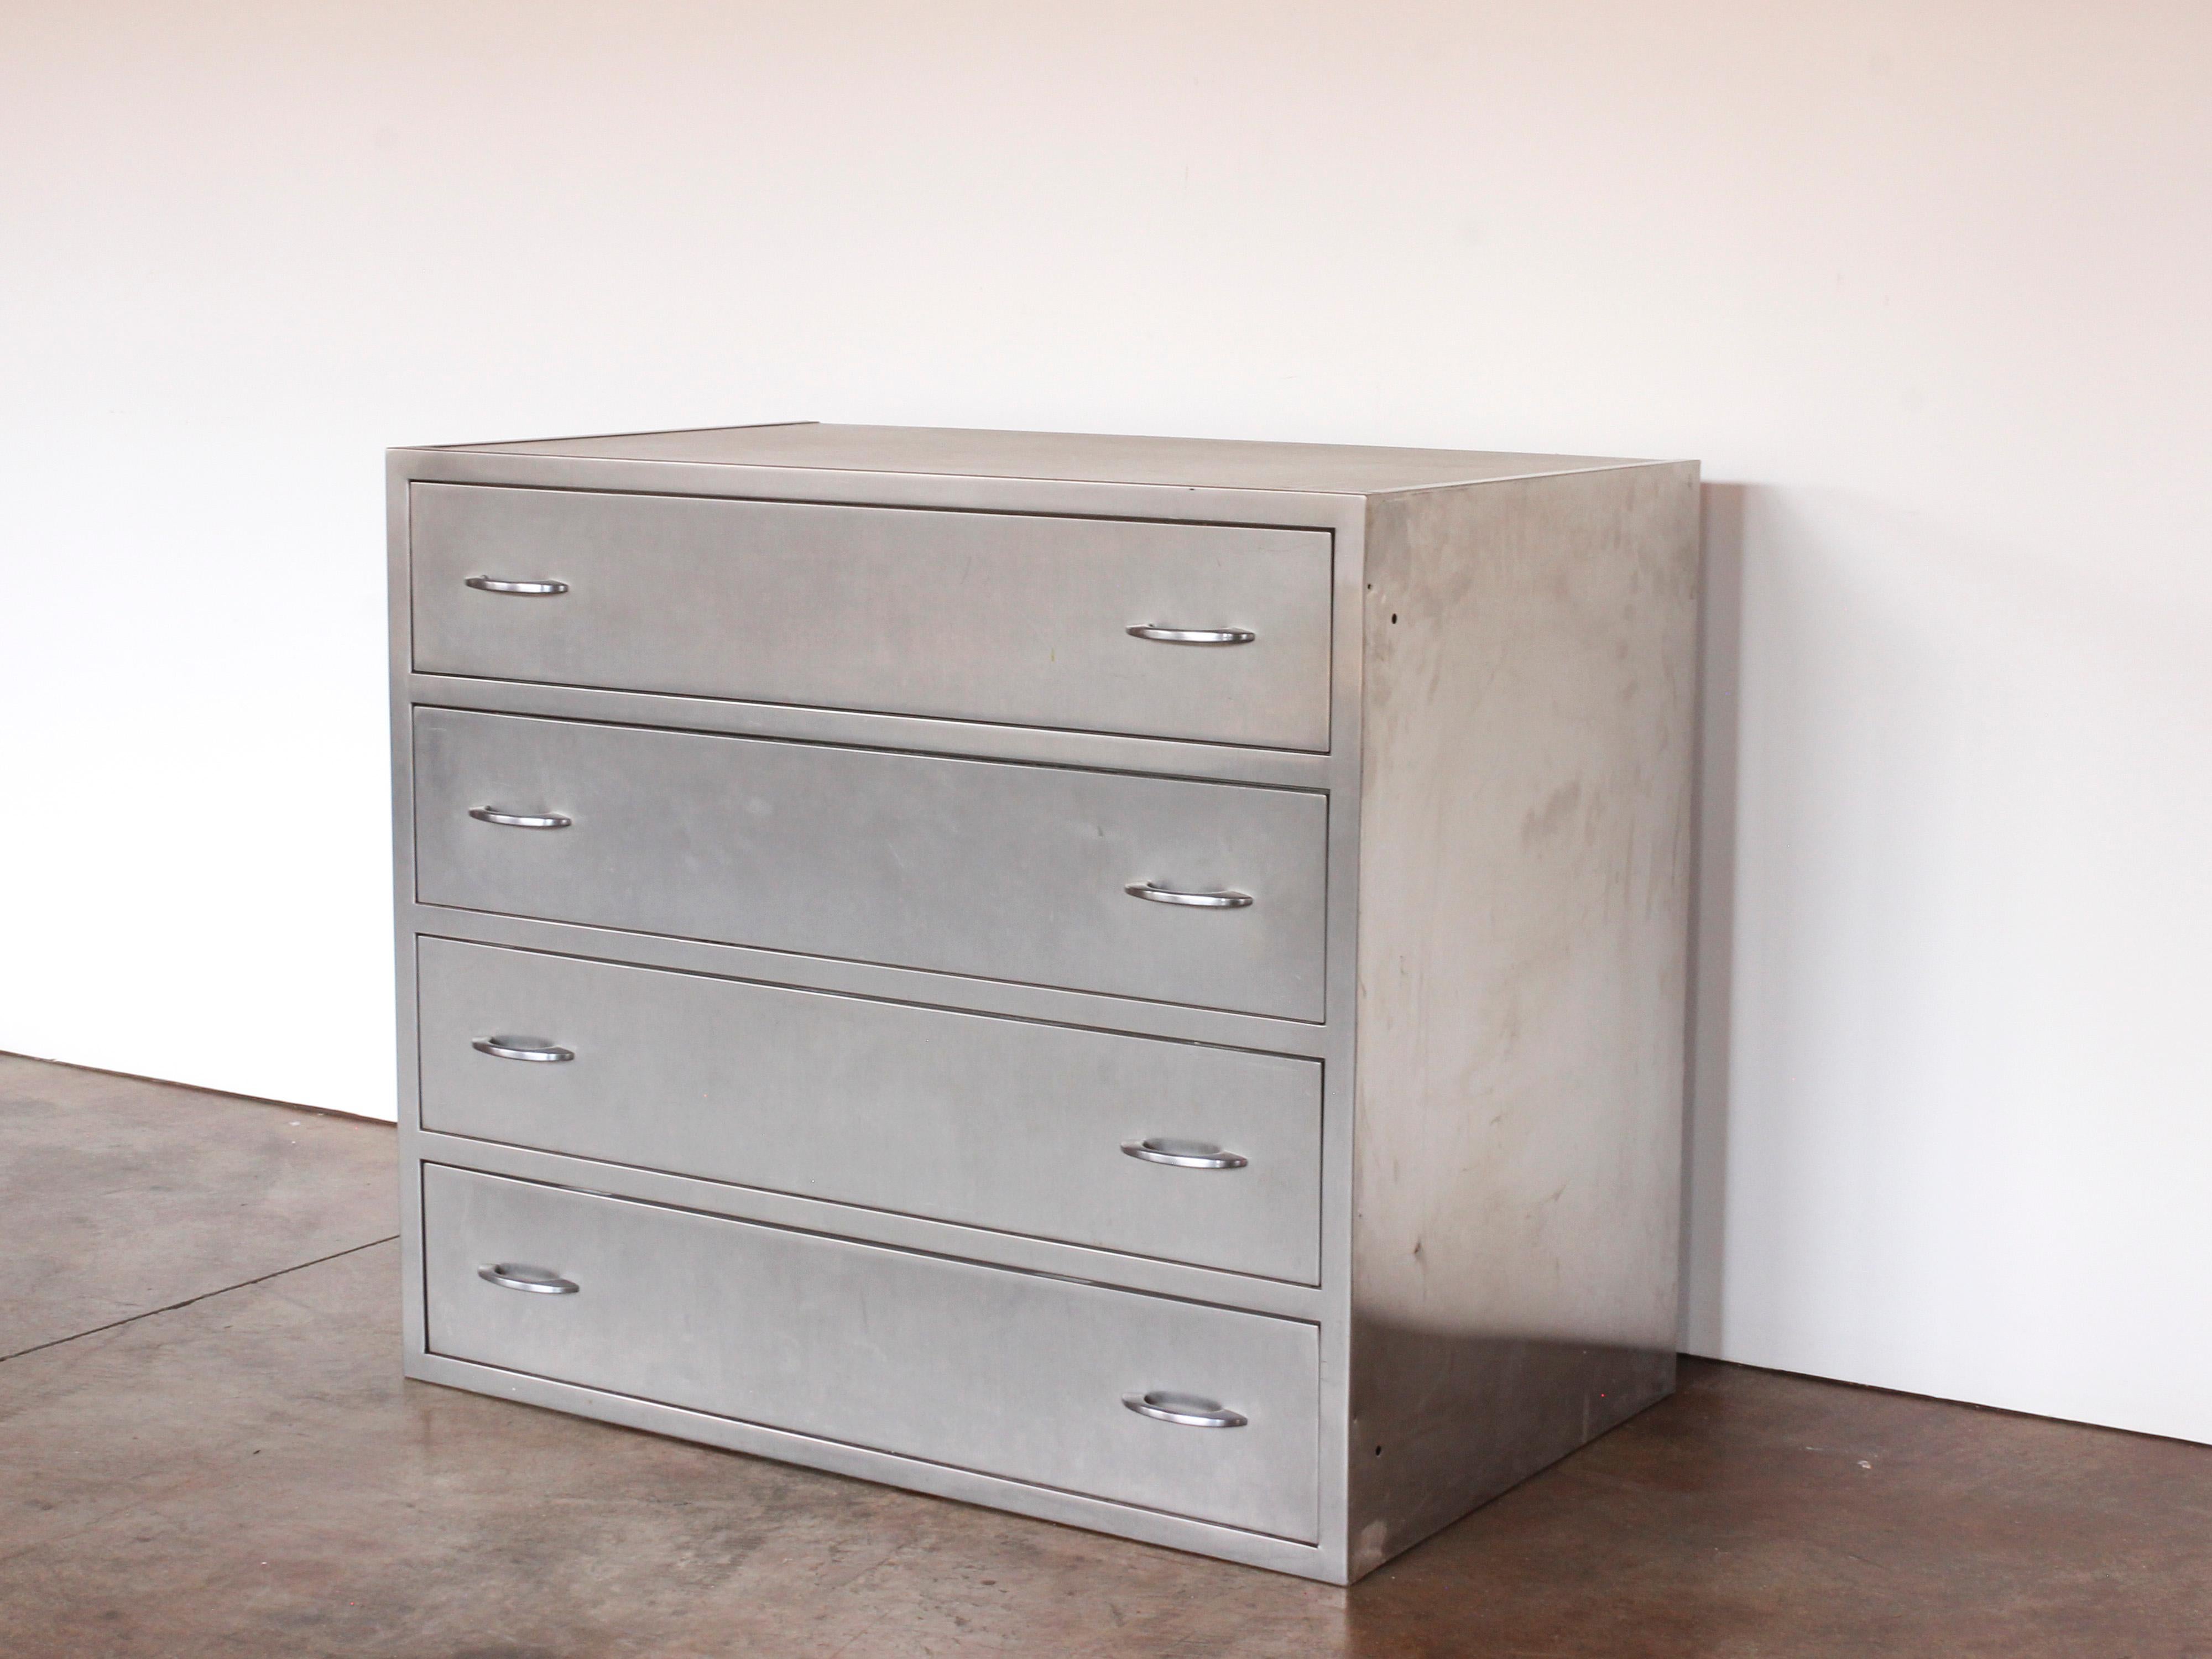 American Industrial Stainless Steel Chest With 4 Drawers, C. 1940s In Good Condition For Sale In Chicago, IL